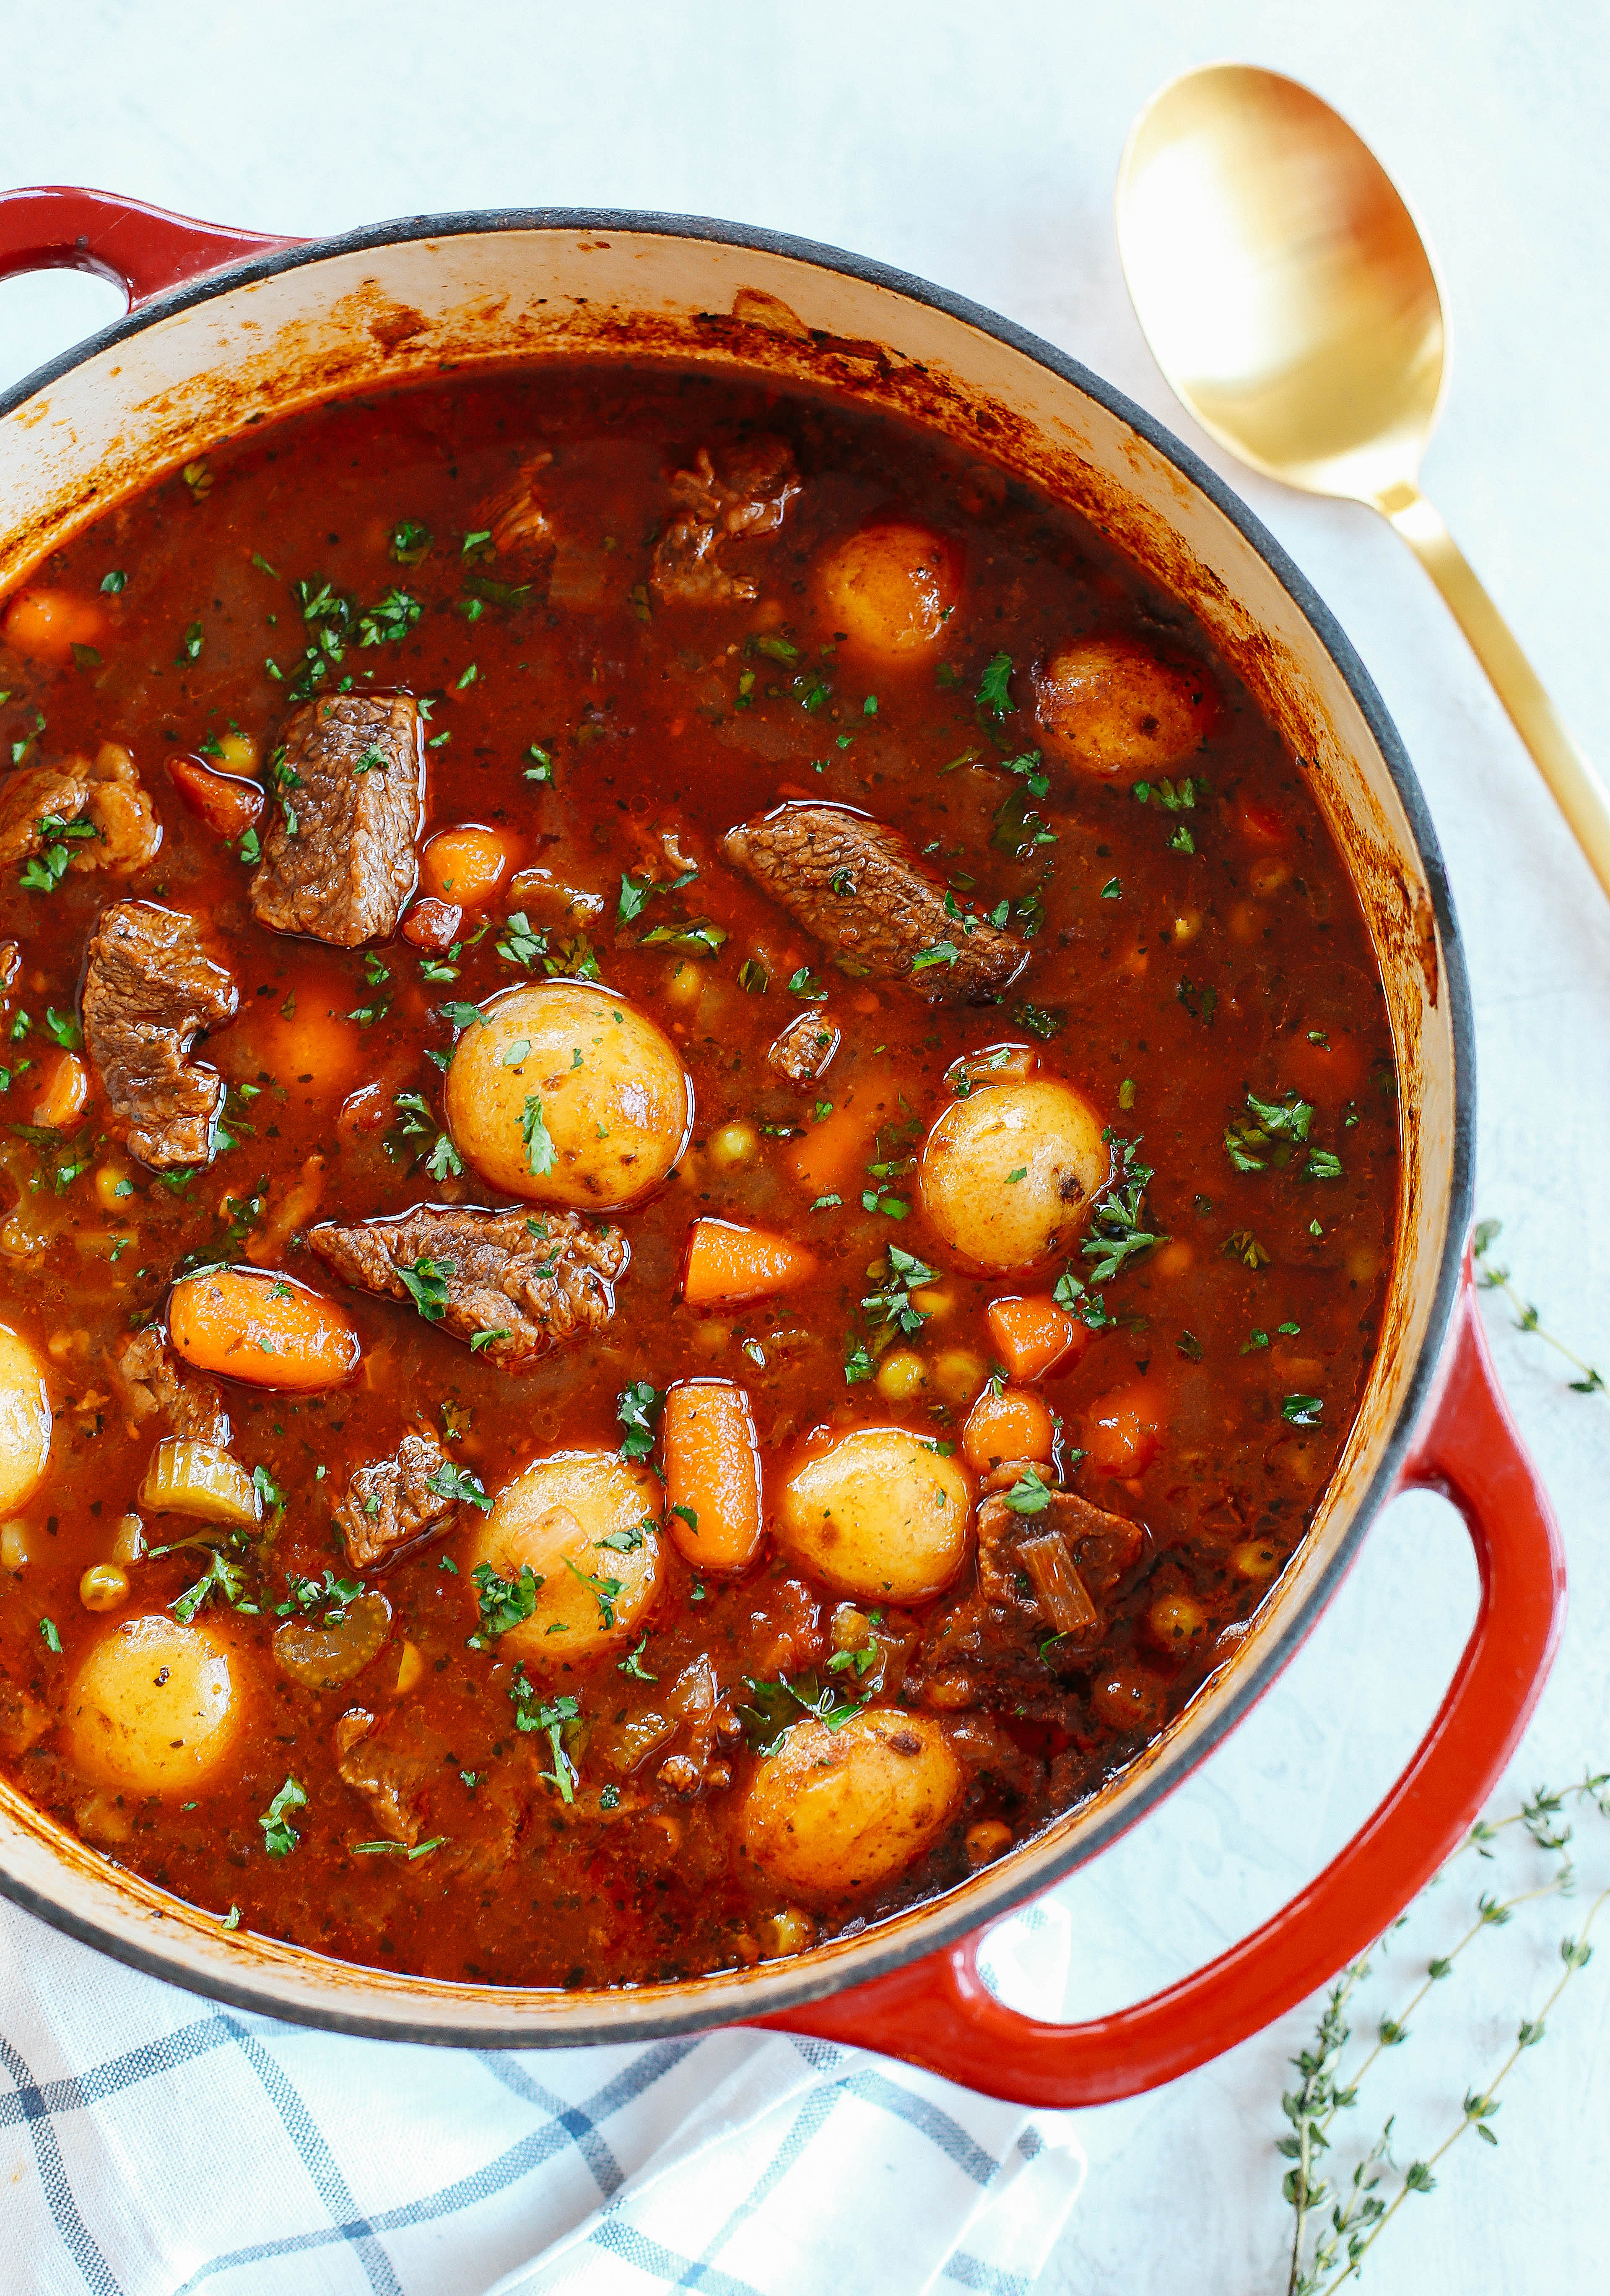 This classic hearty beef and tomato stew is true comfort food at its finest and can easily be made in your instant pot, slow cooker or right on the stove!